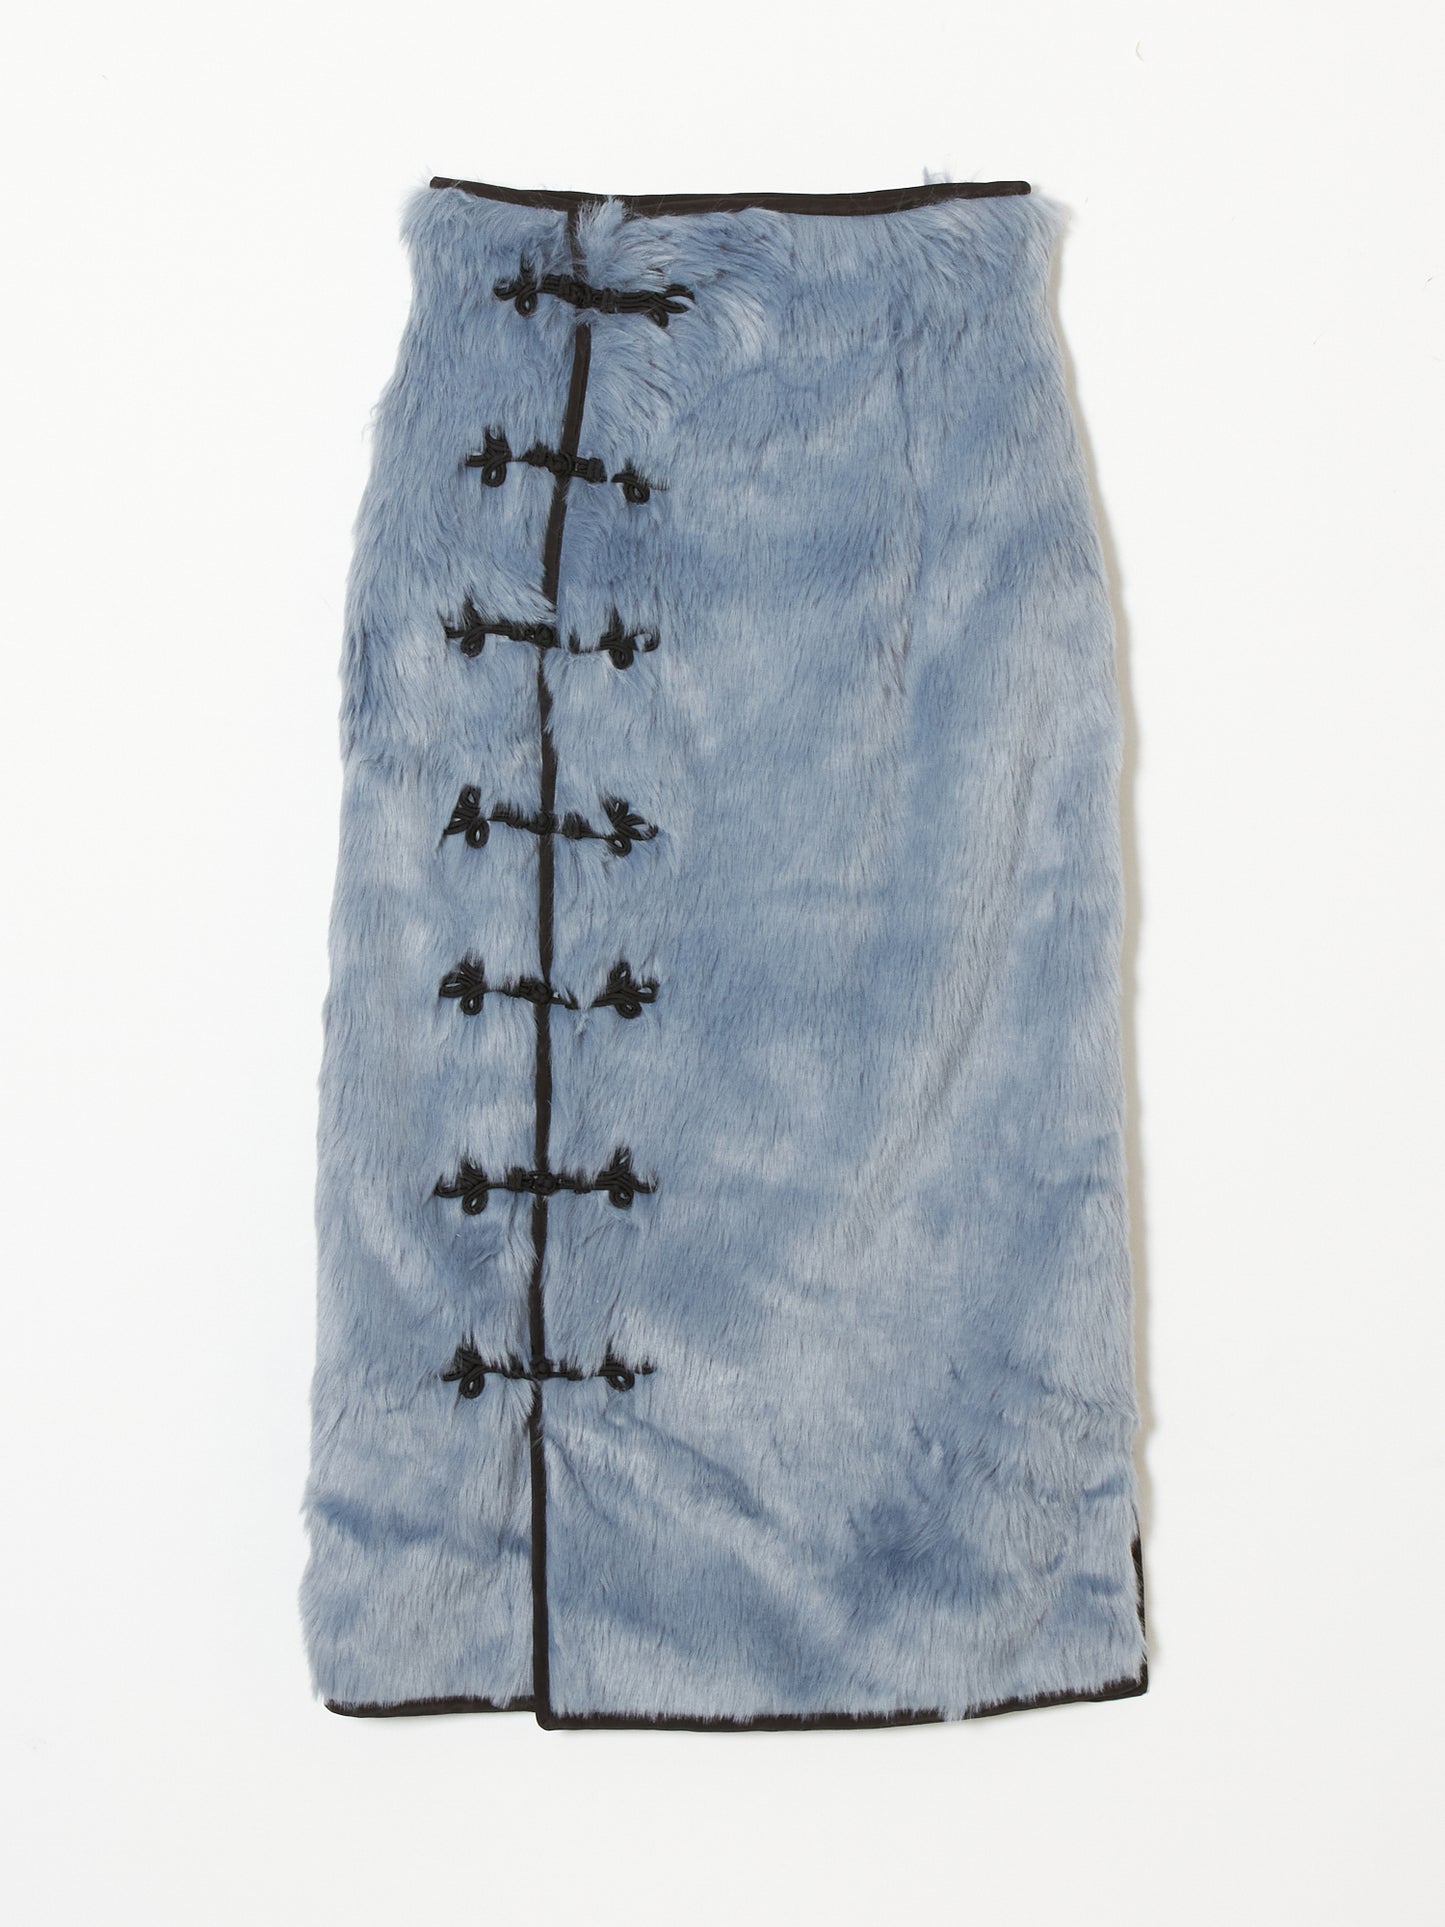 sax fur skirt【Delivery in January 2023】